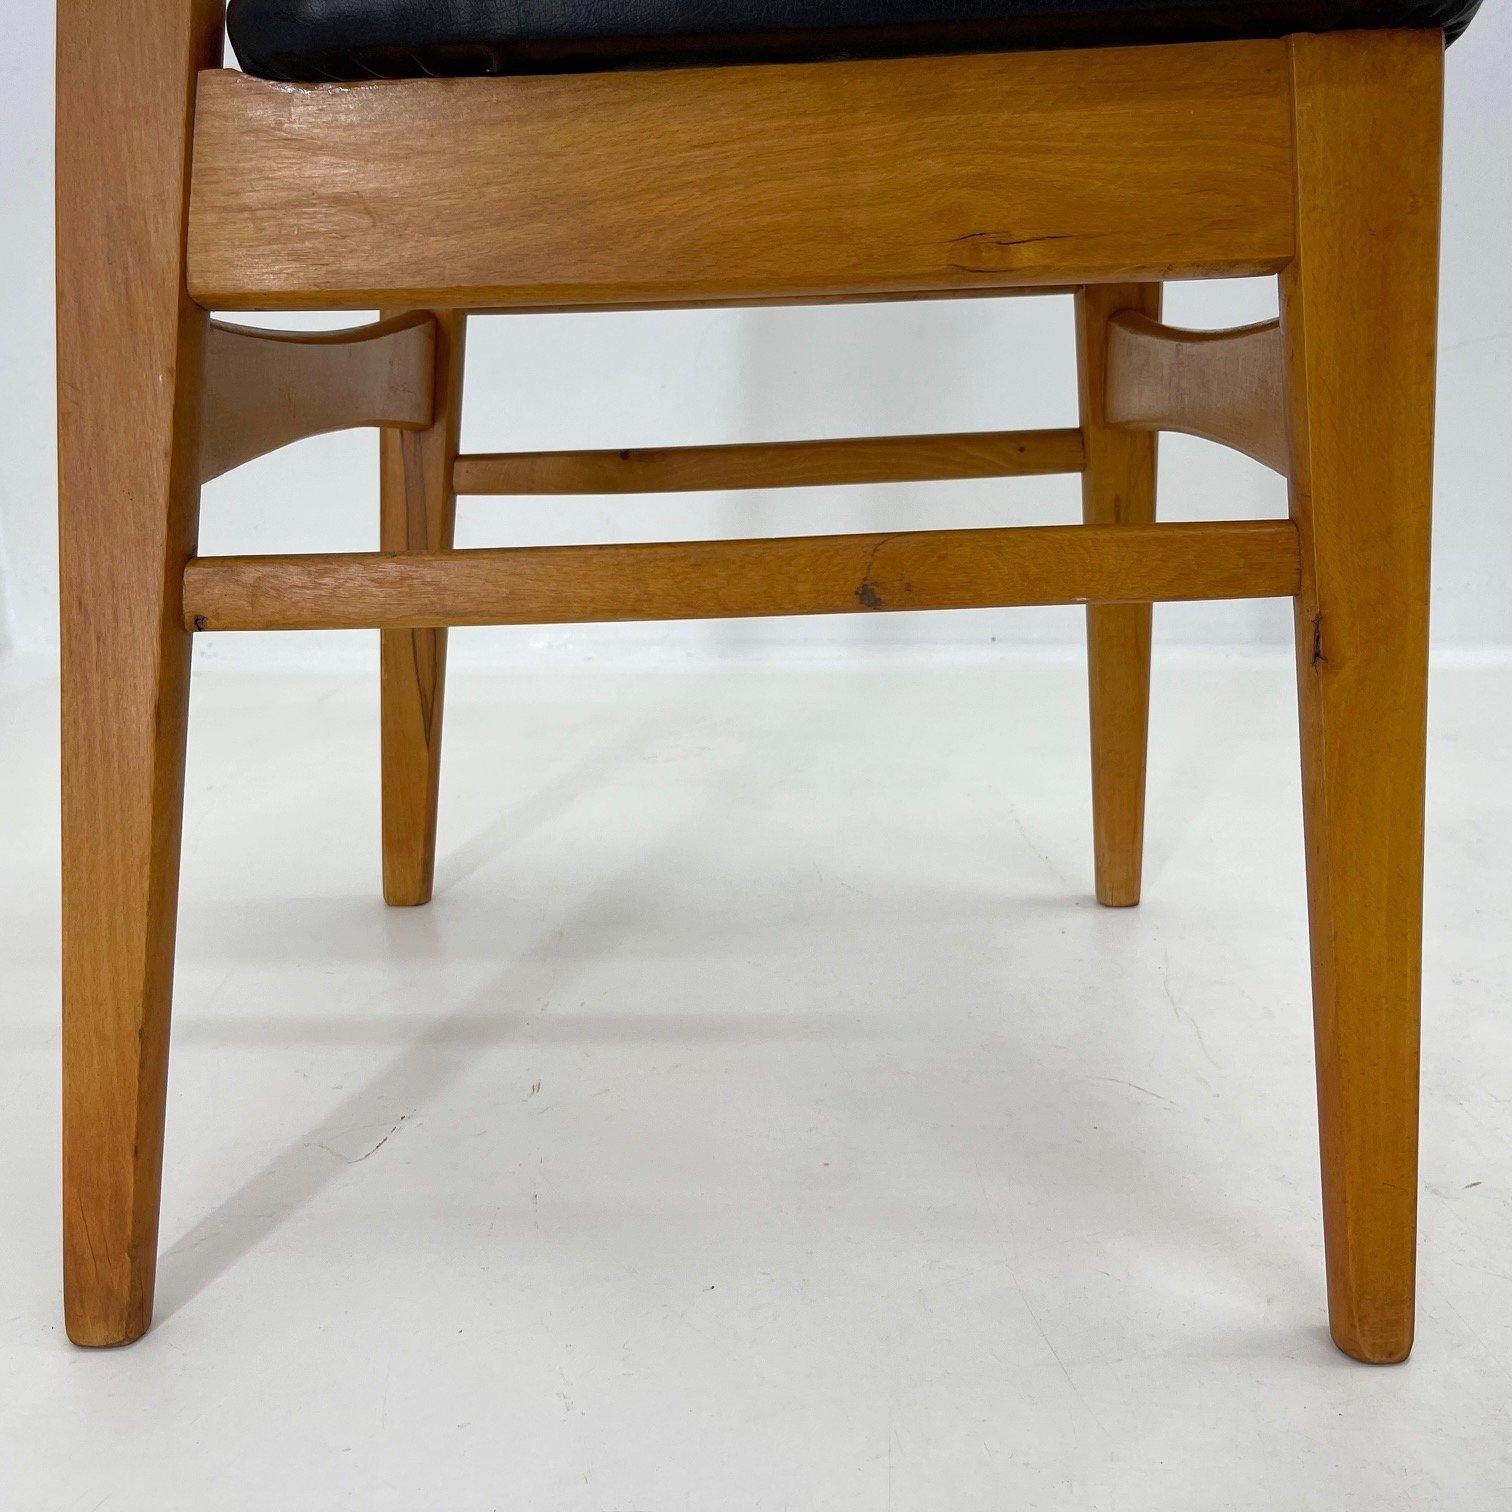 Set of 6 Leatherette & Wood Chairs, Czechoslovakia, 1960's For Sale 5